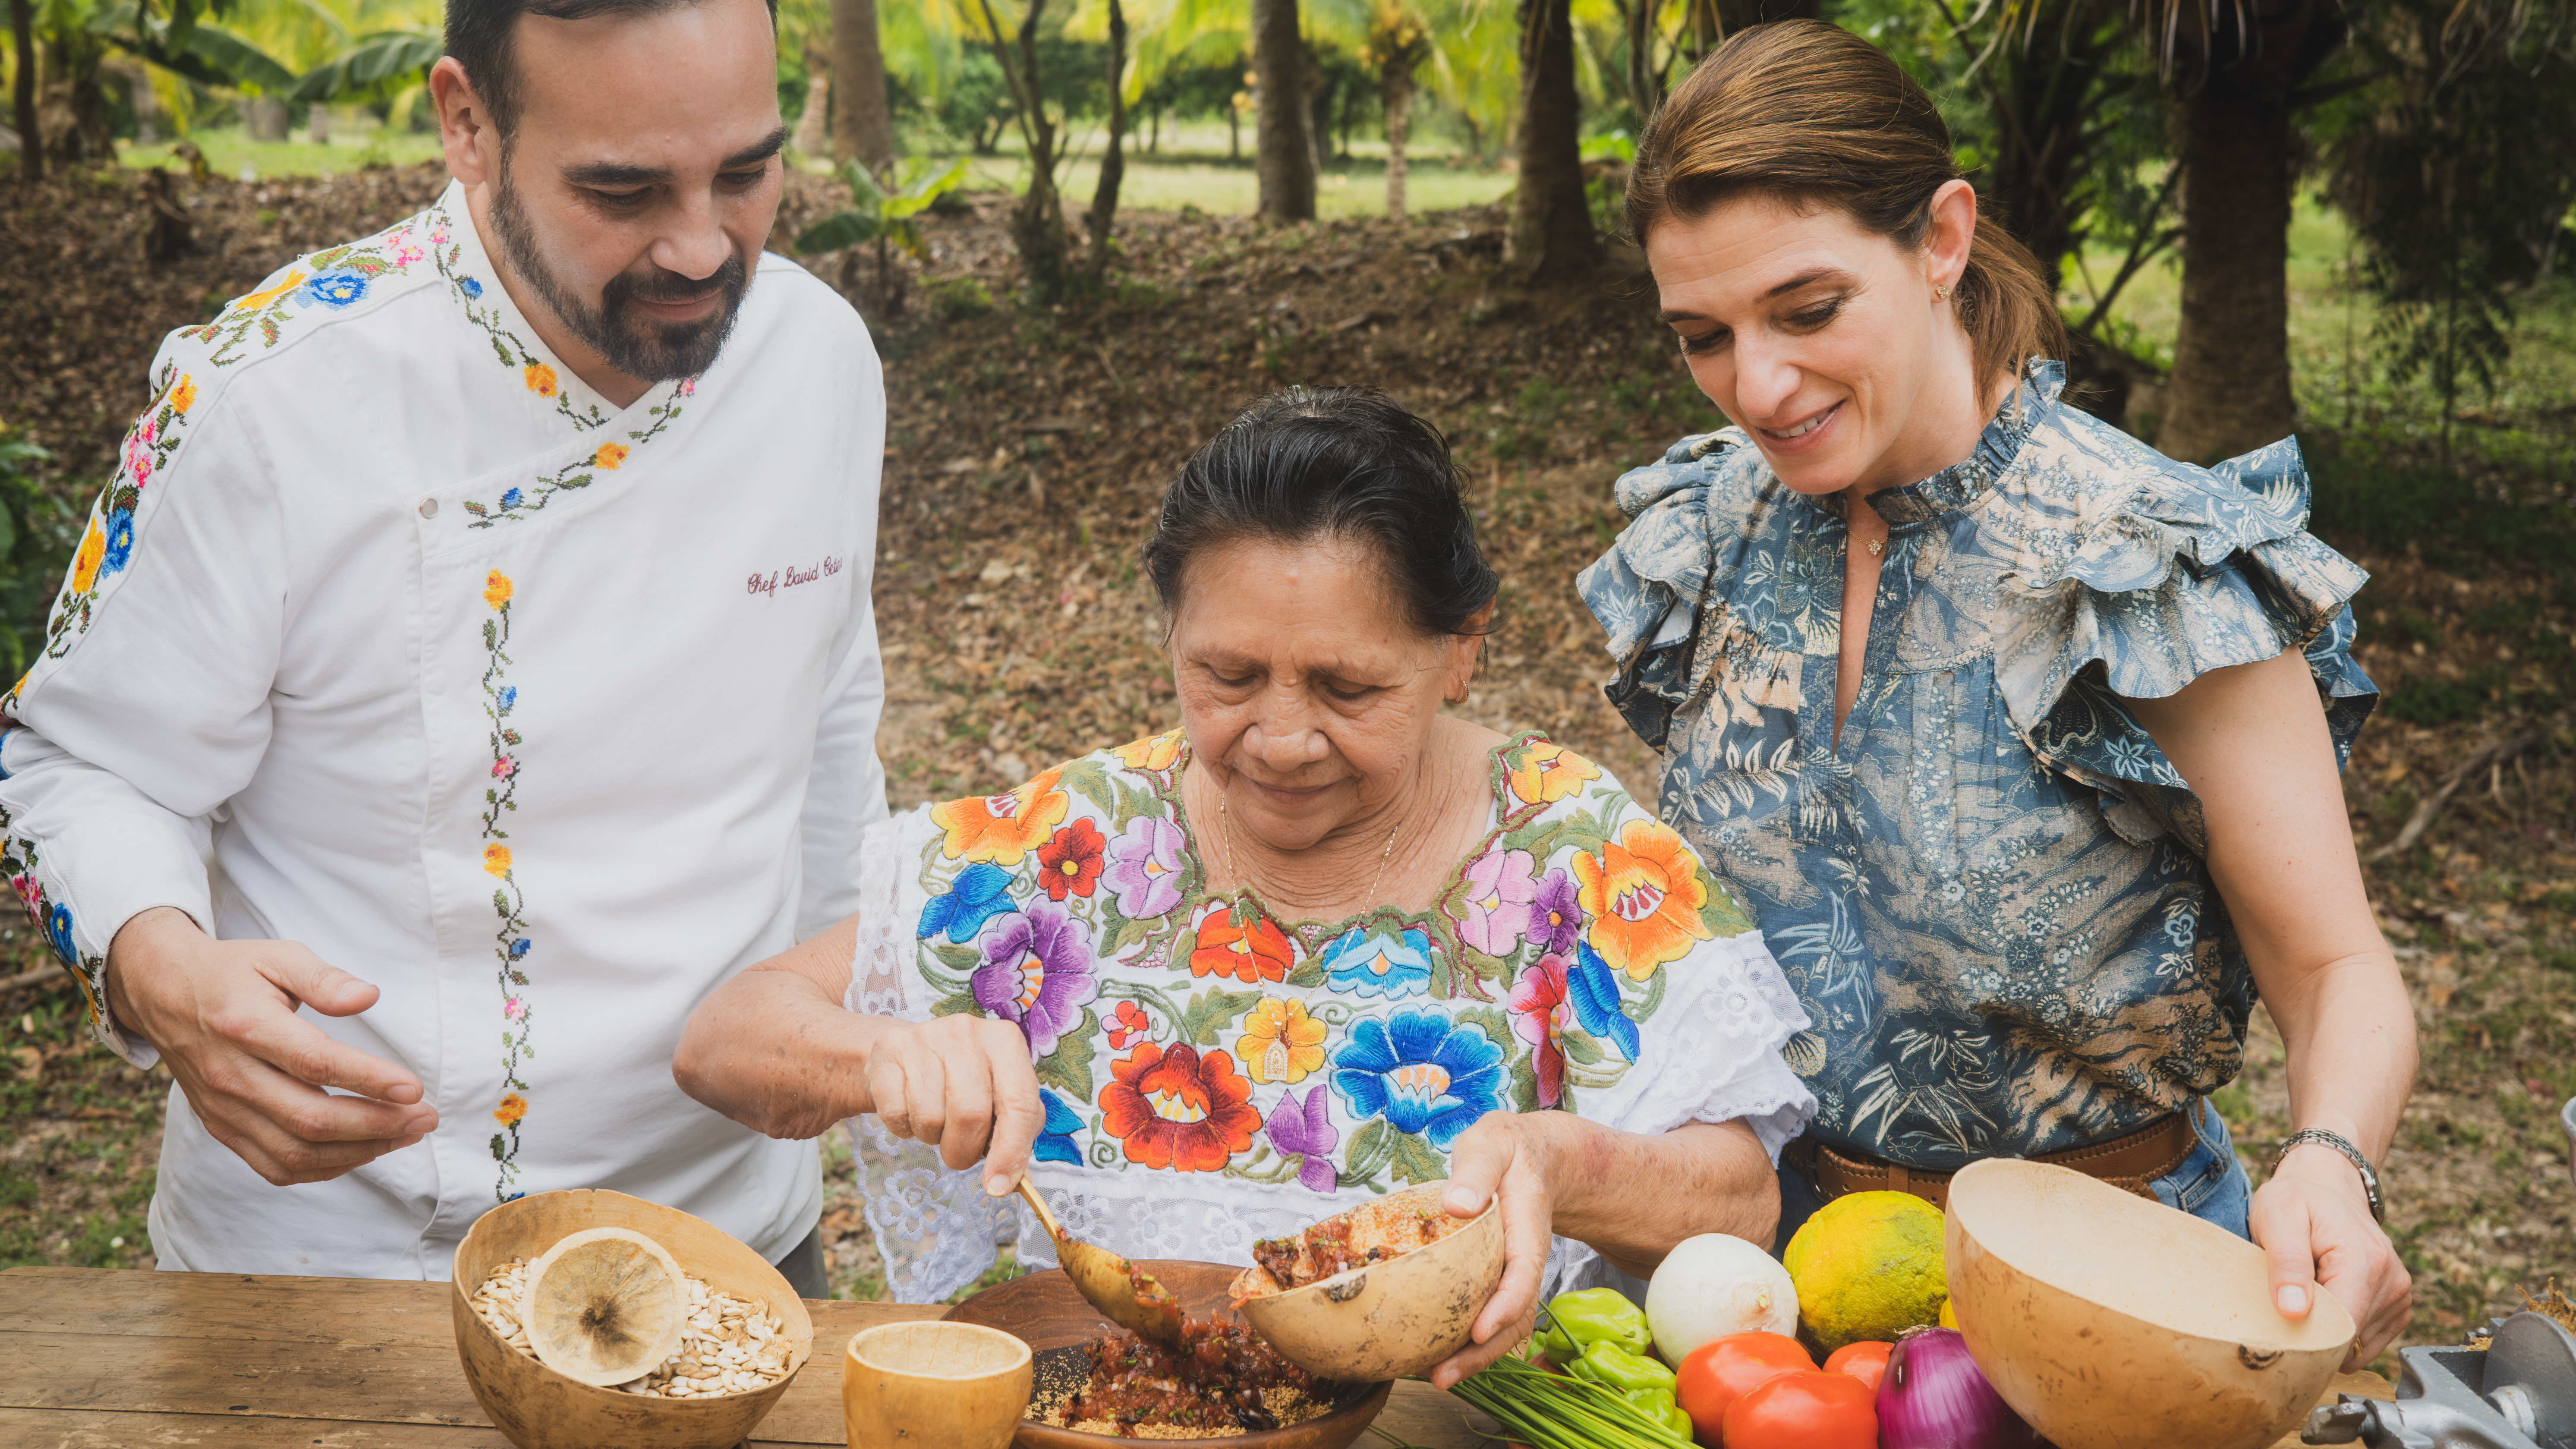 Check your local listings for Pati's Mexican Table Season 12 airing on a station near you!